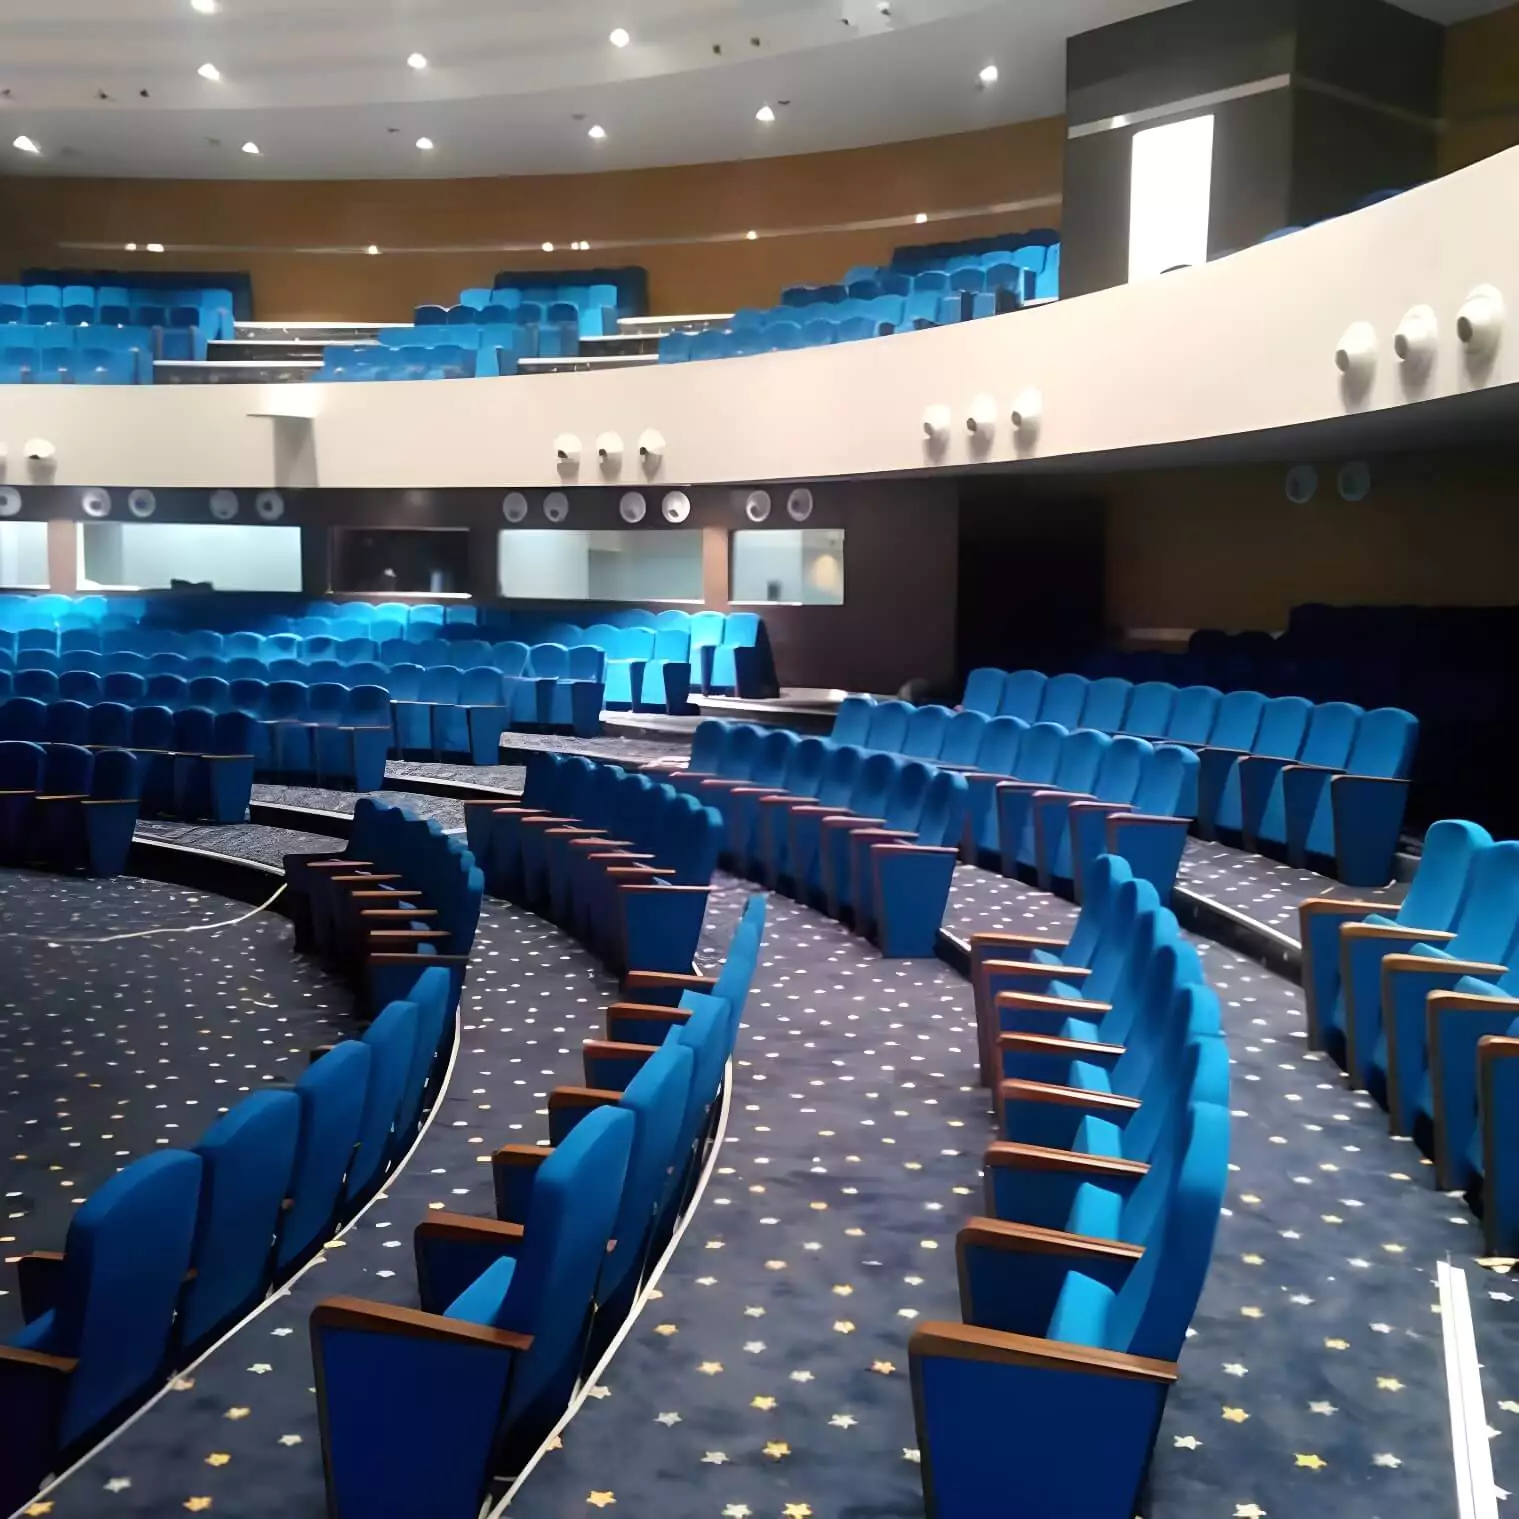 The Evolution of Seating in Conference and Auditorium Spaces